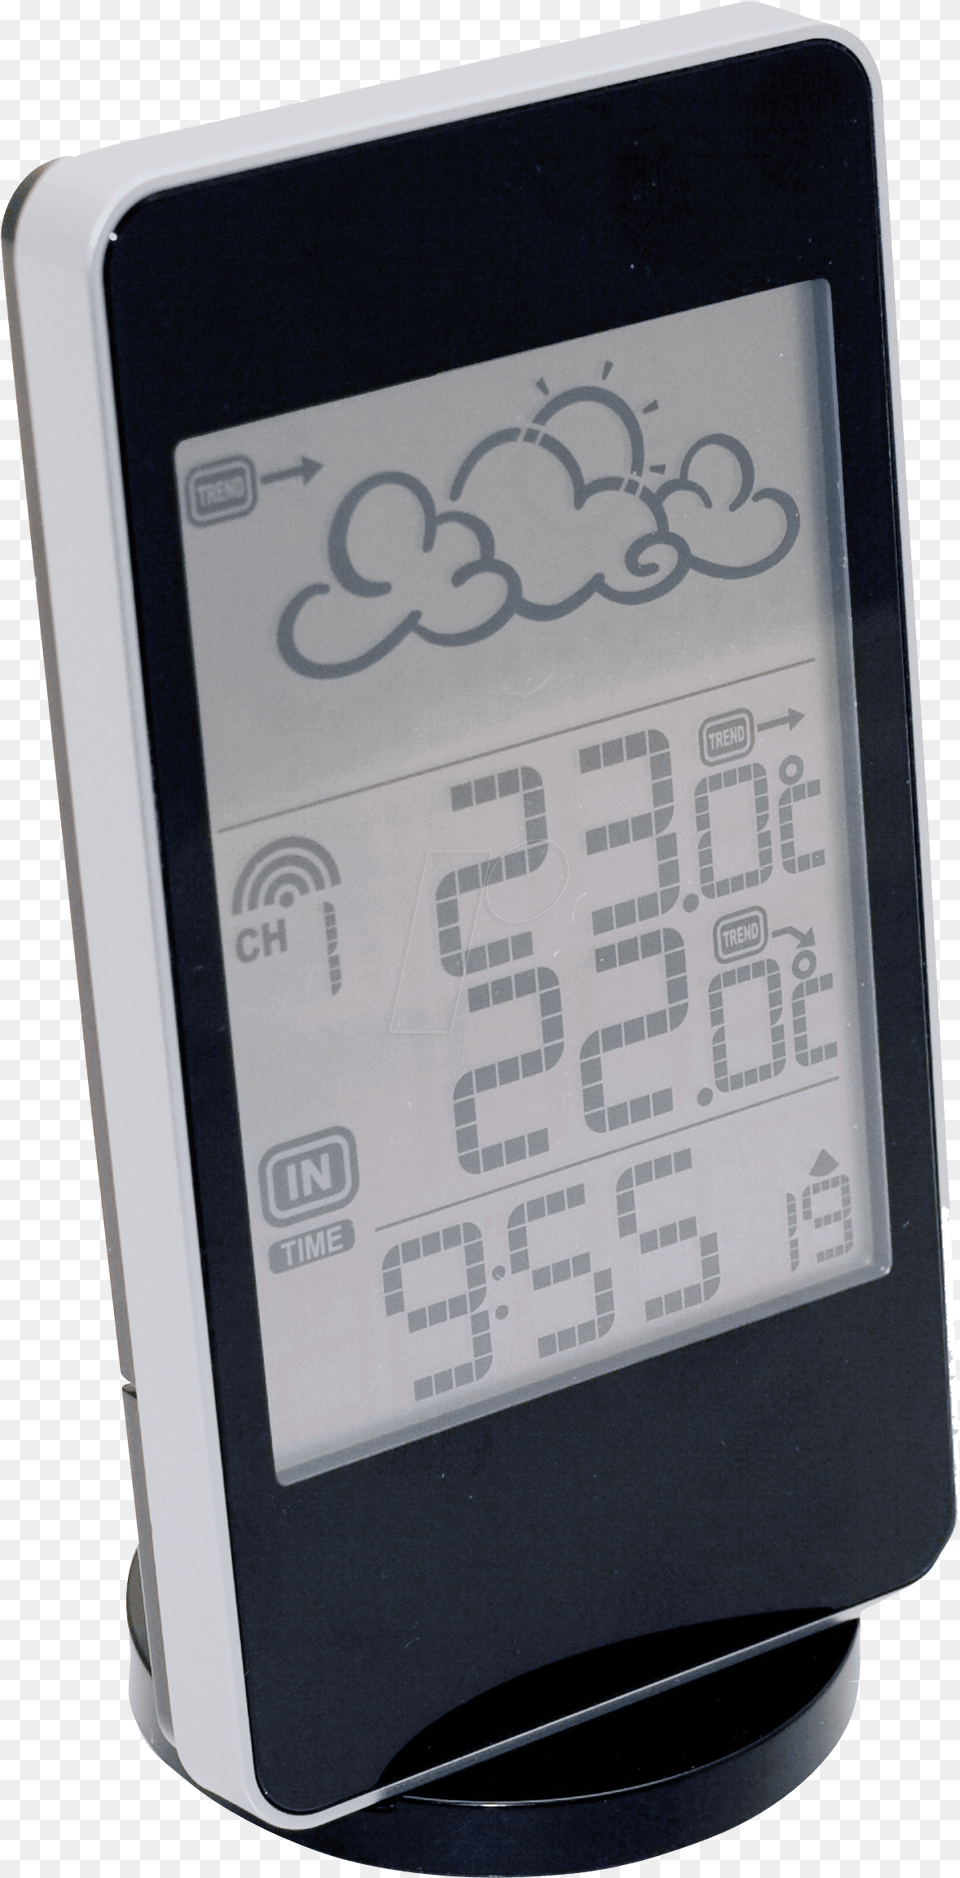 Elegant Thermometer With Weather Forecast Ventus, Electronics, Mobile Phone, Phone, Computer Hardware Png Image